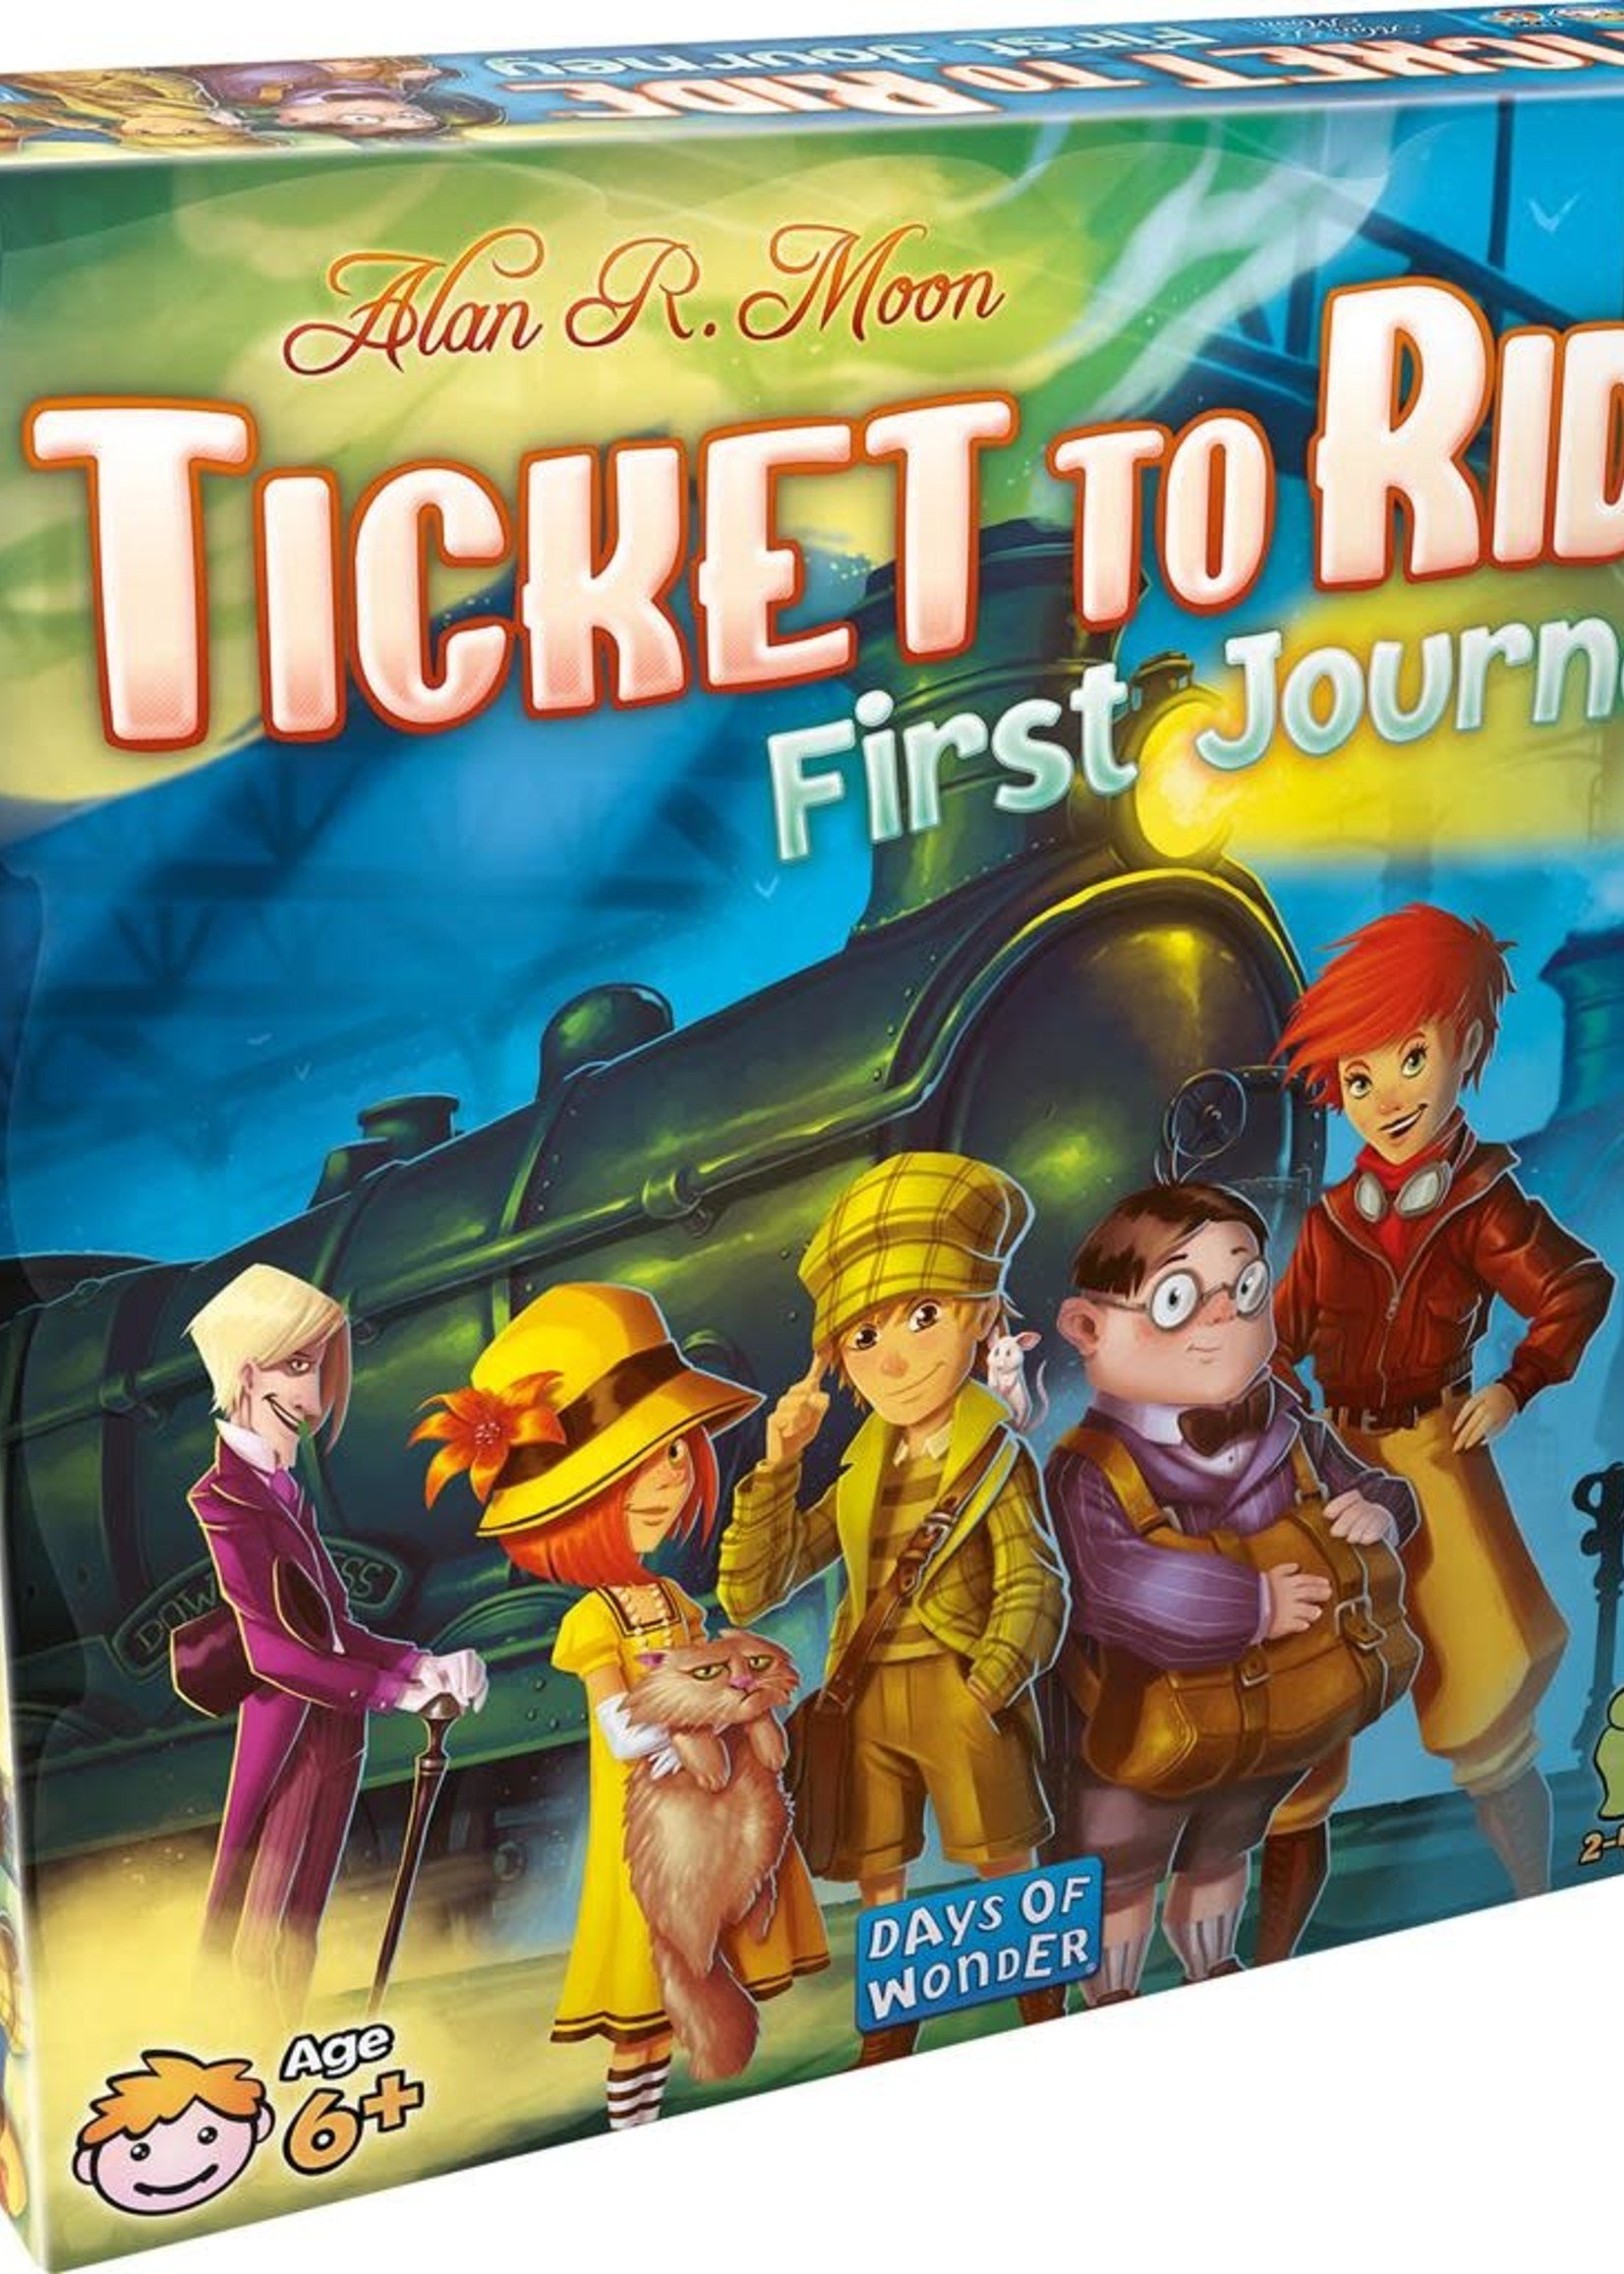 Asmodee ticket to ride first journey